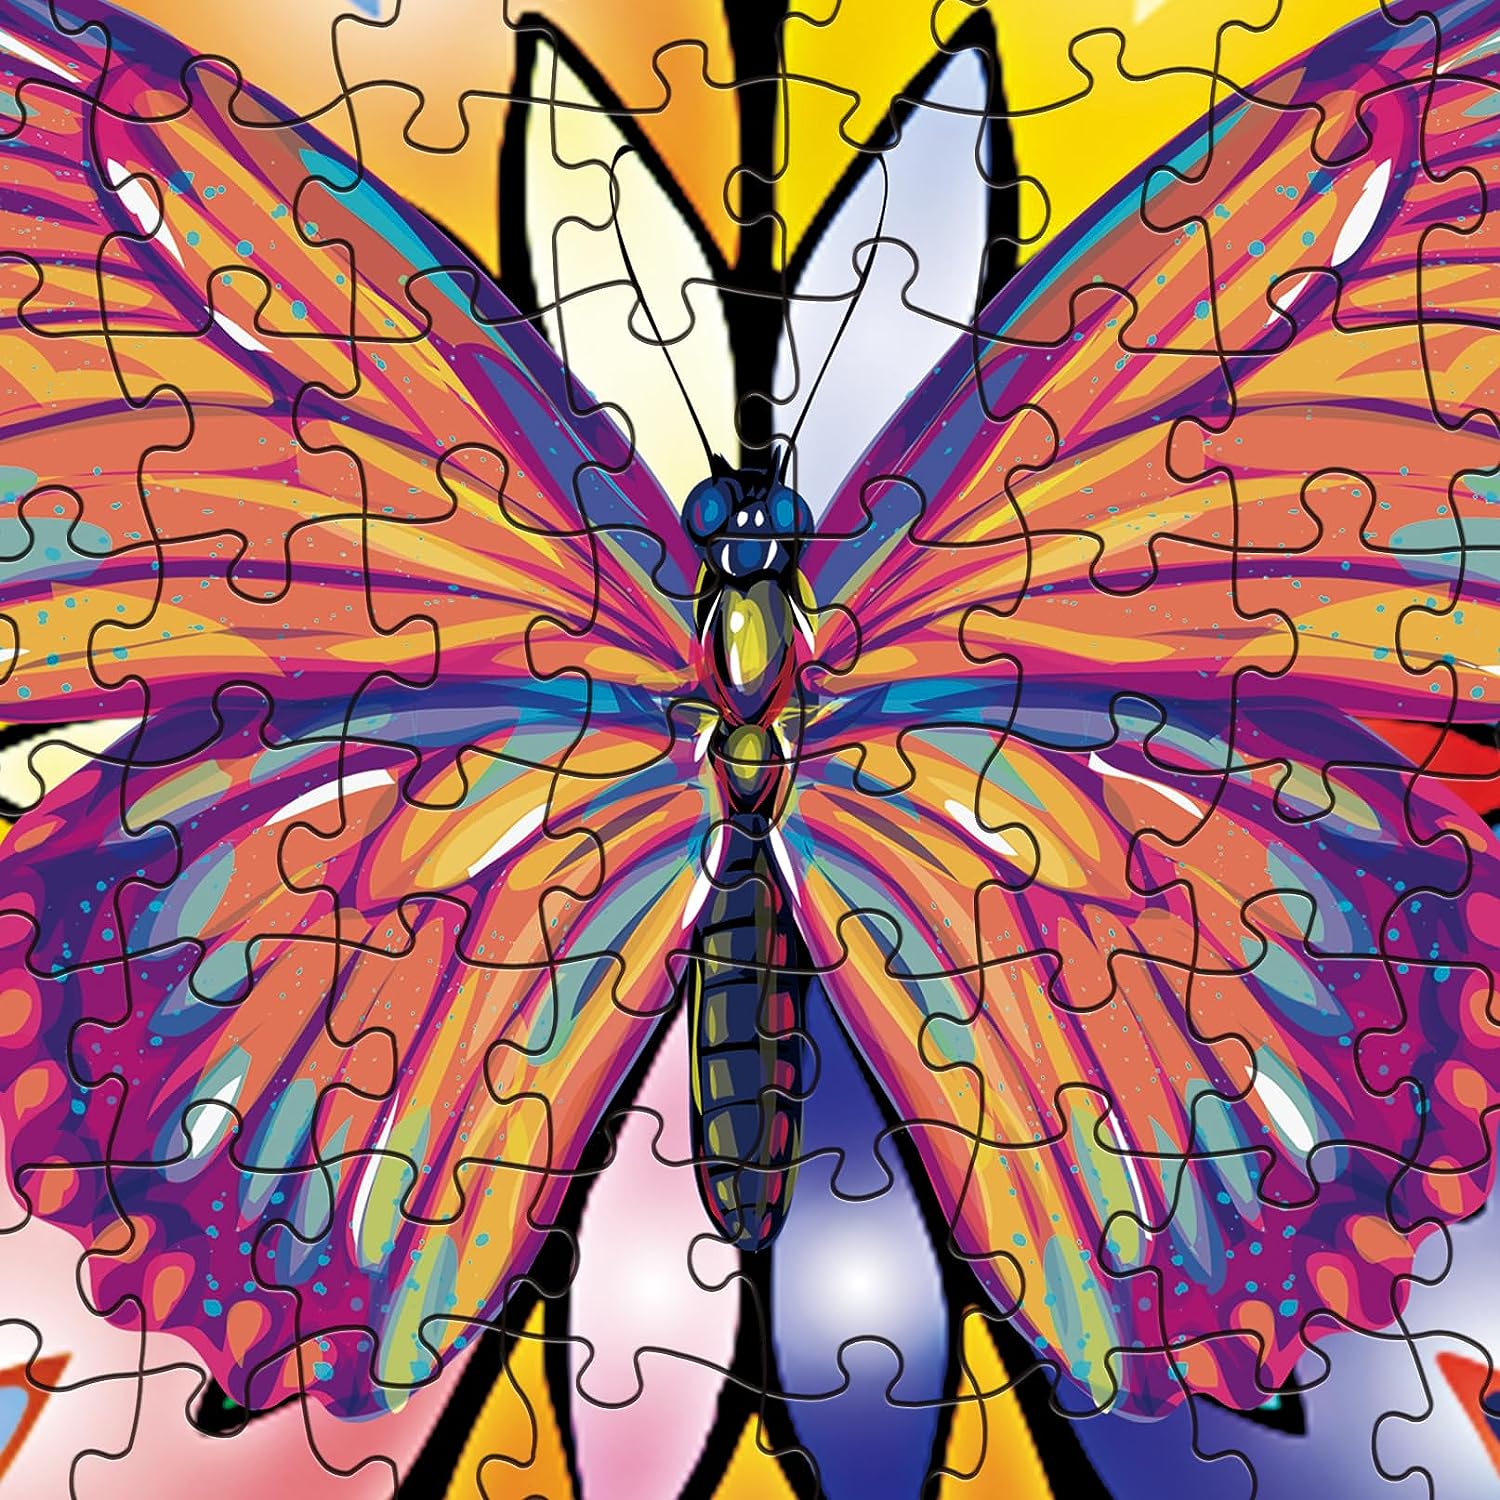 Butterfly Mandala Jigsaw Puzzle 1000 Pieces